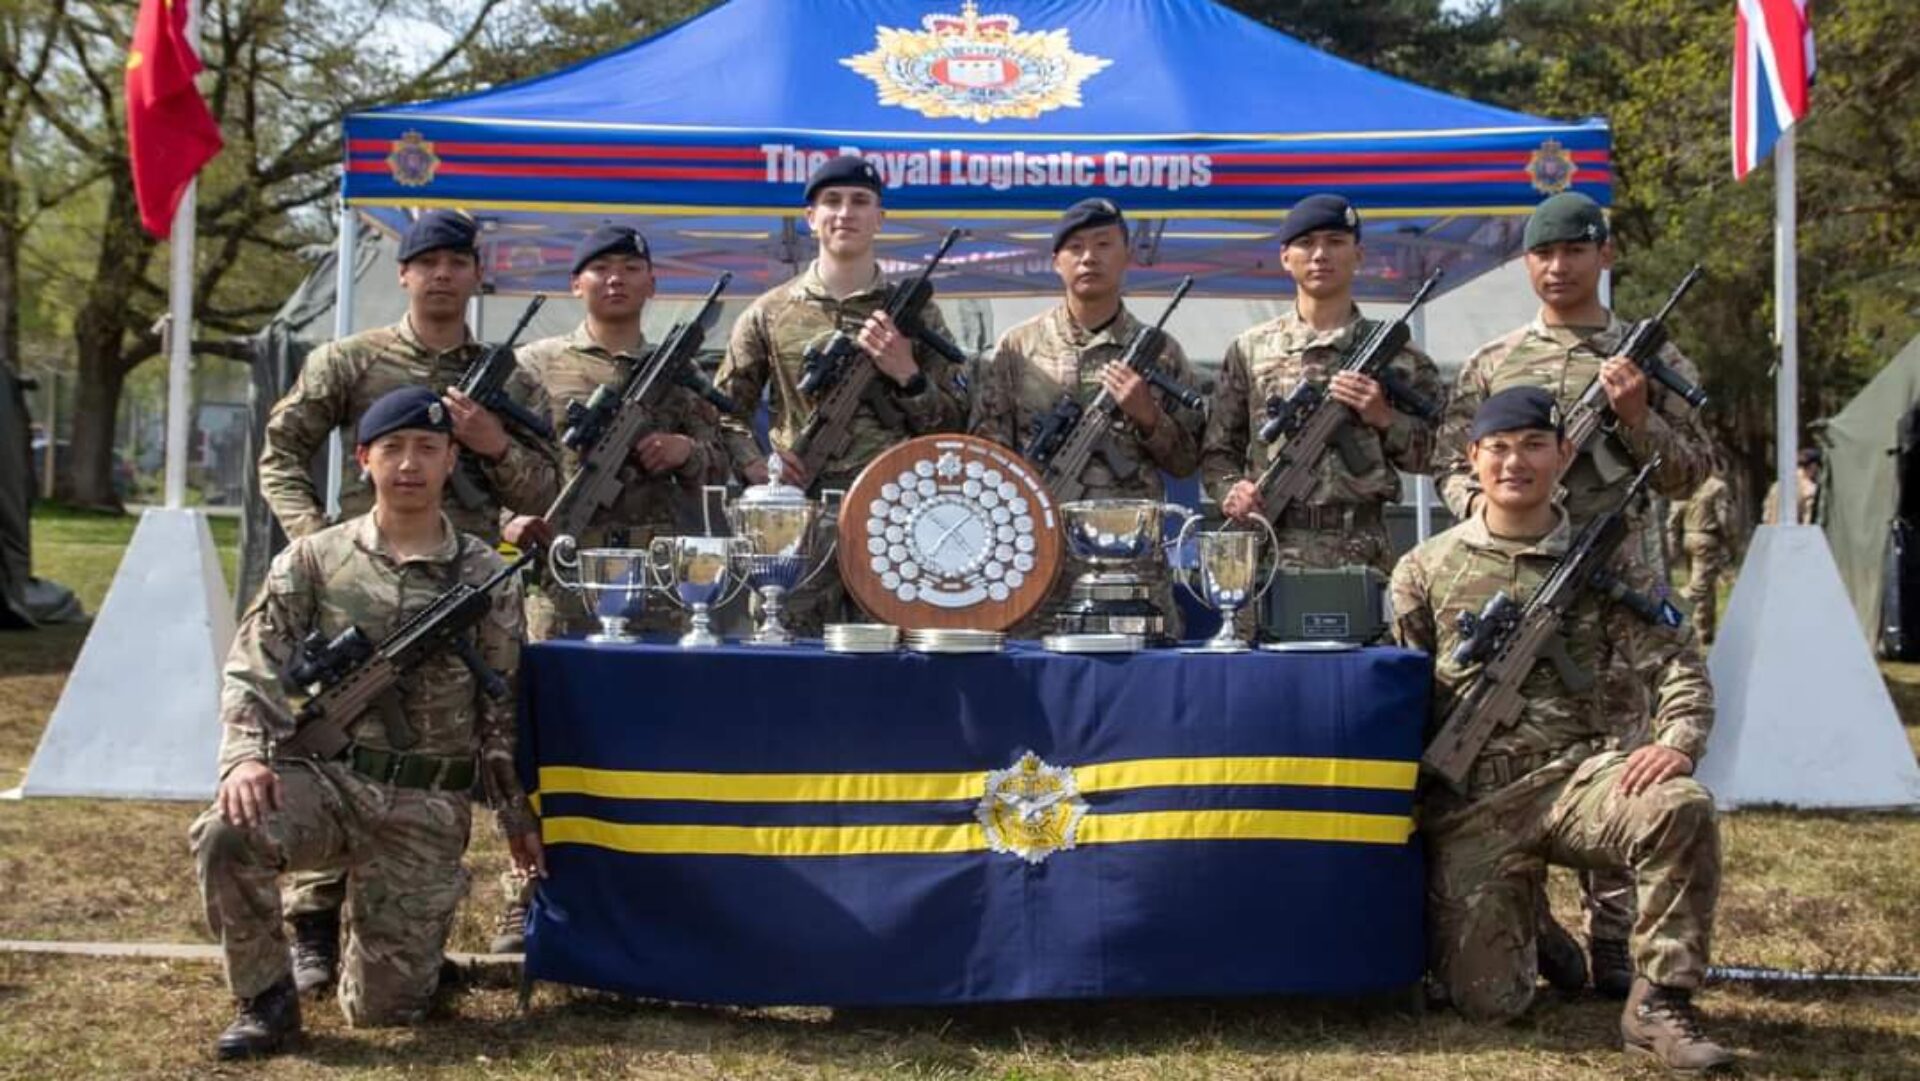 The shooting team from Gurkha Allied Rapid Reaction Corps Support Battalion based in Gloucester, UK, secured first place at the Corps Operational Shooting Competition at Pirbright.